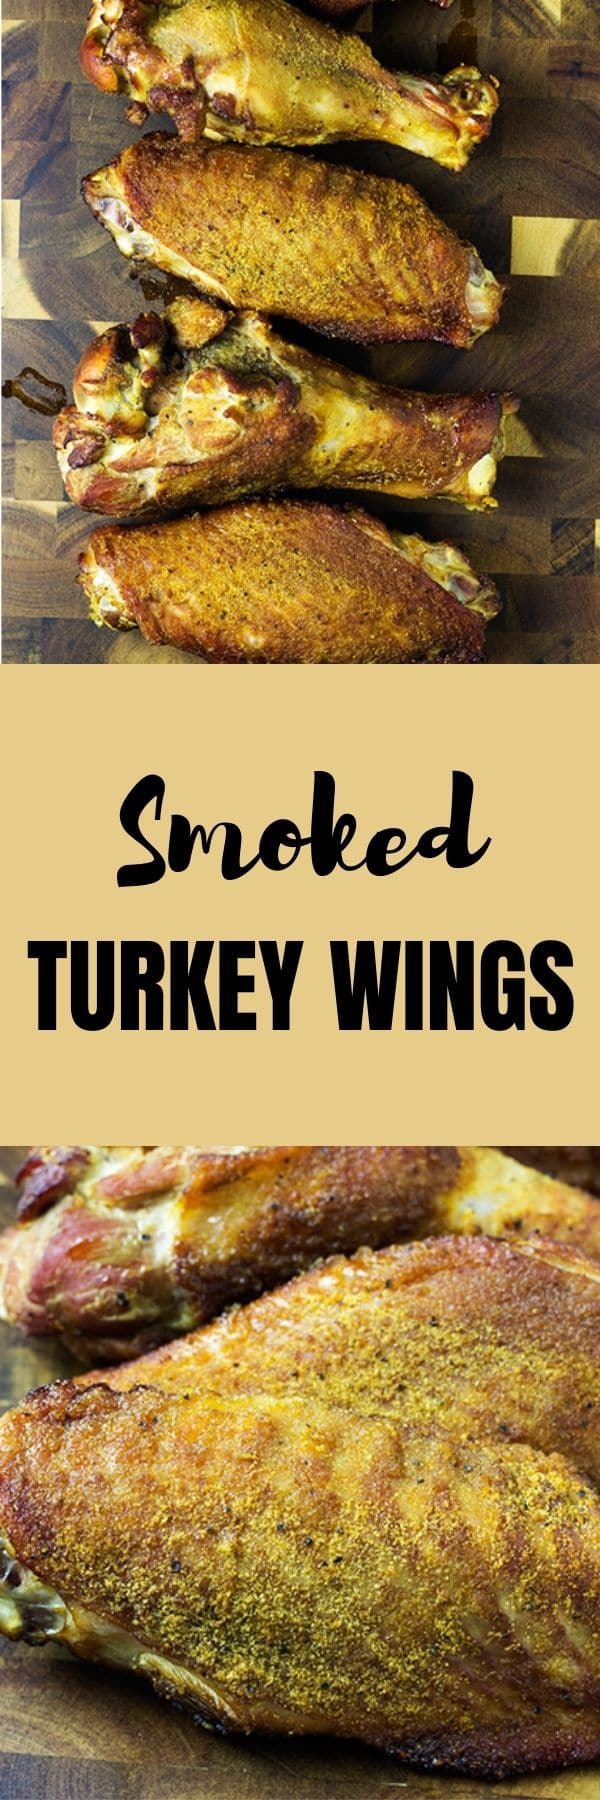 Smoked Turkey Wings In 2 Hours [Step By Step Recipe]